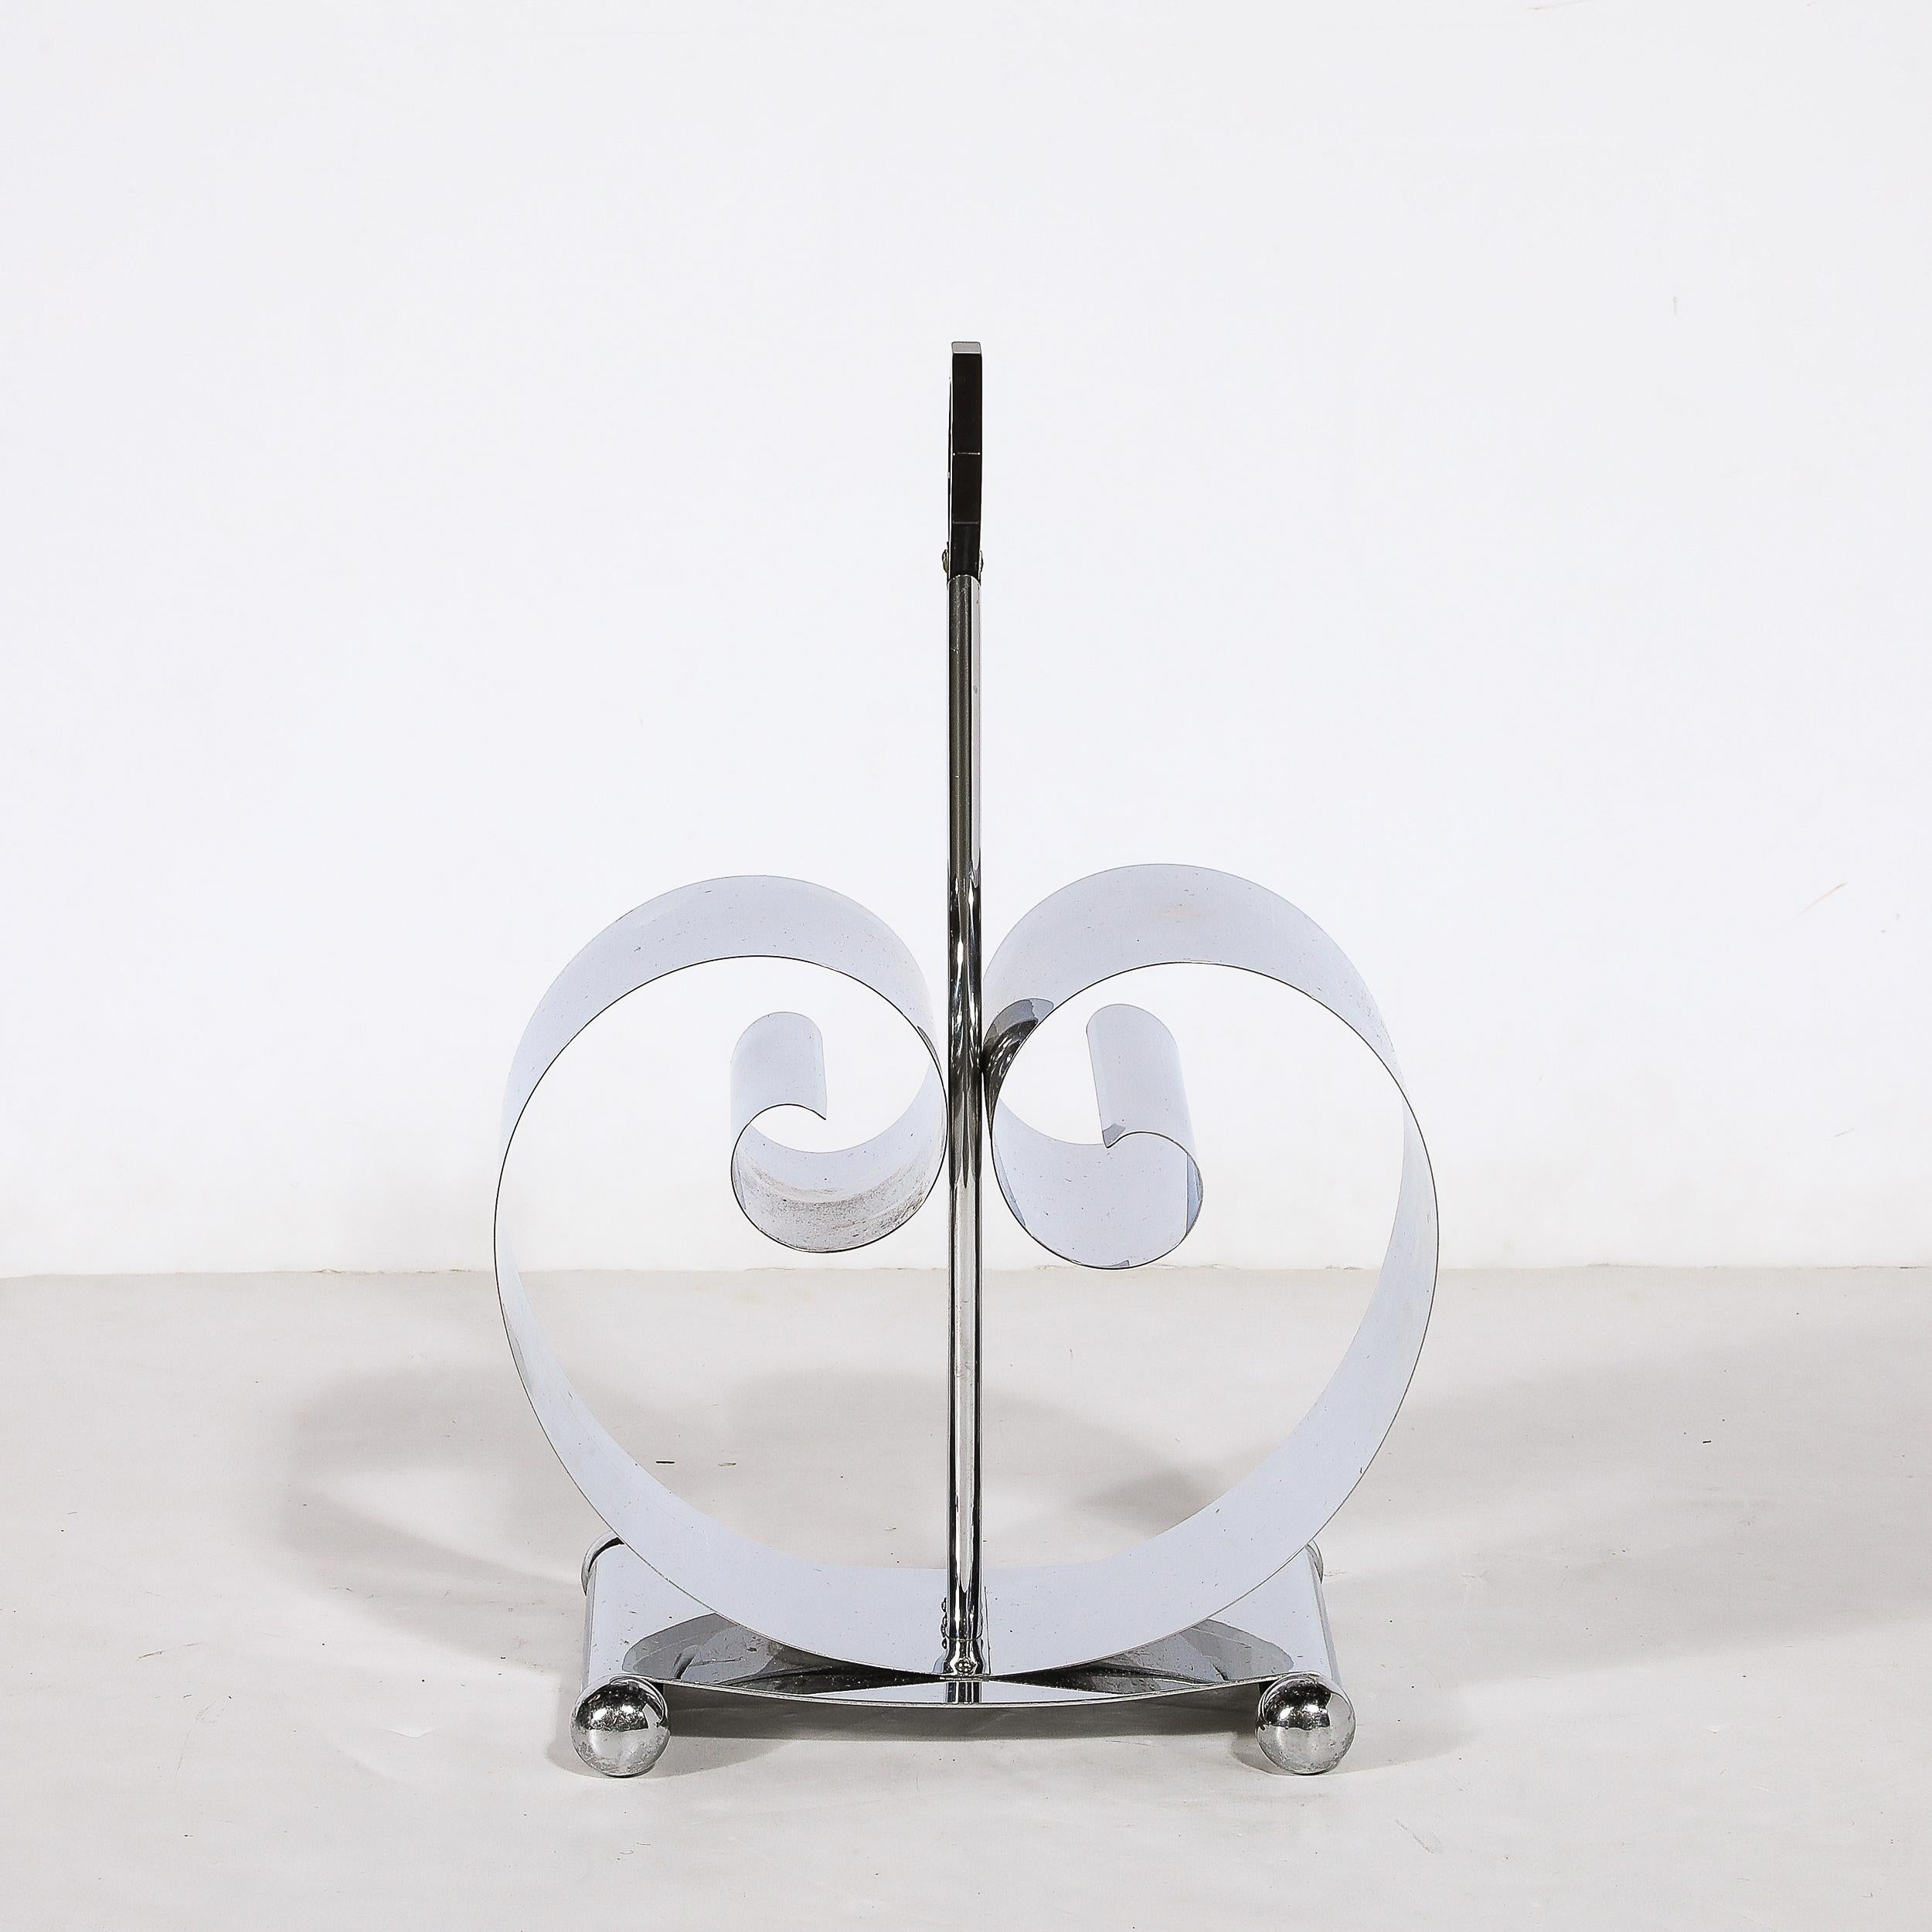 This elegant magazine stand was realized in the United States by Fred Farr for Revere in America, circa 1935. Handcrafted in Rome, New York, this piece offers a banded and streamlined black enamel base from which two curling chrome scroll forms